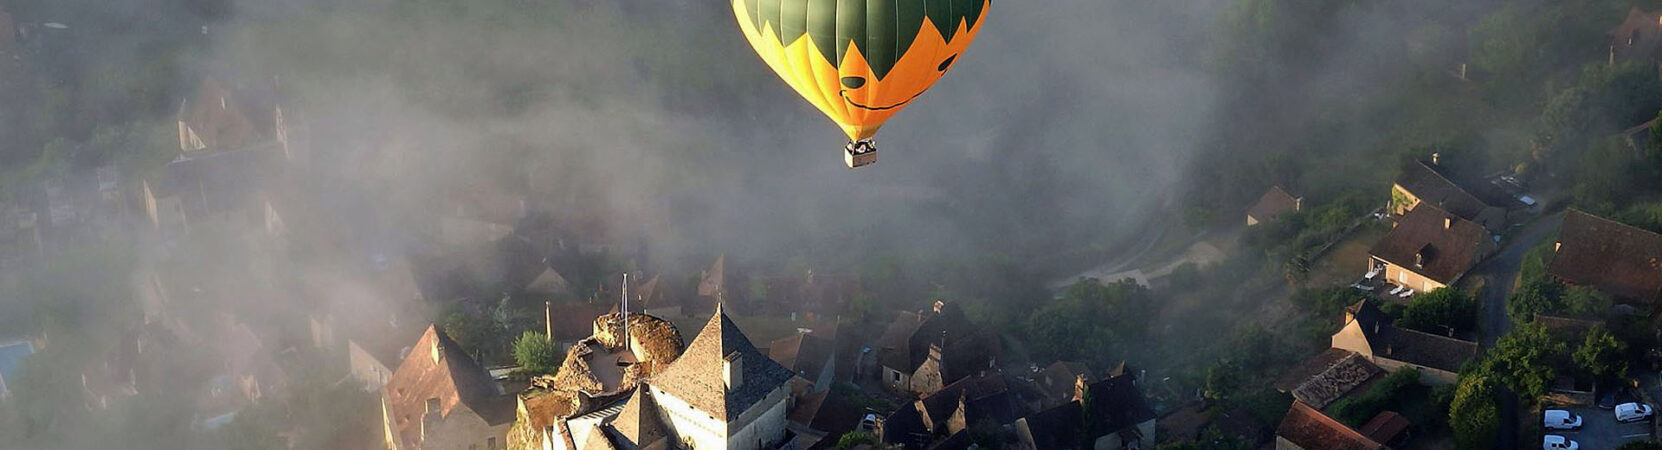 Perigord France Montgolfieres